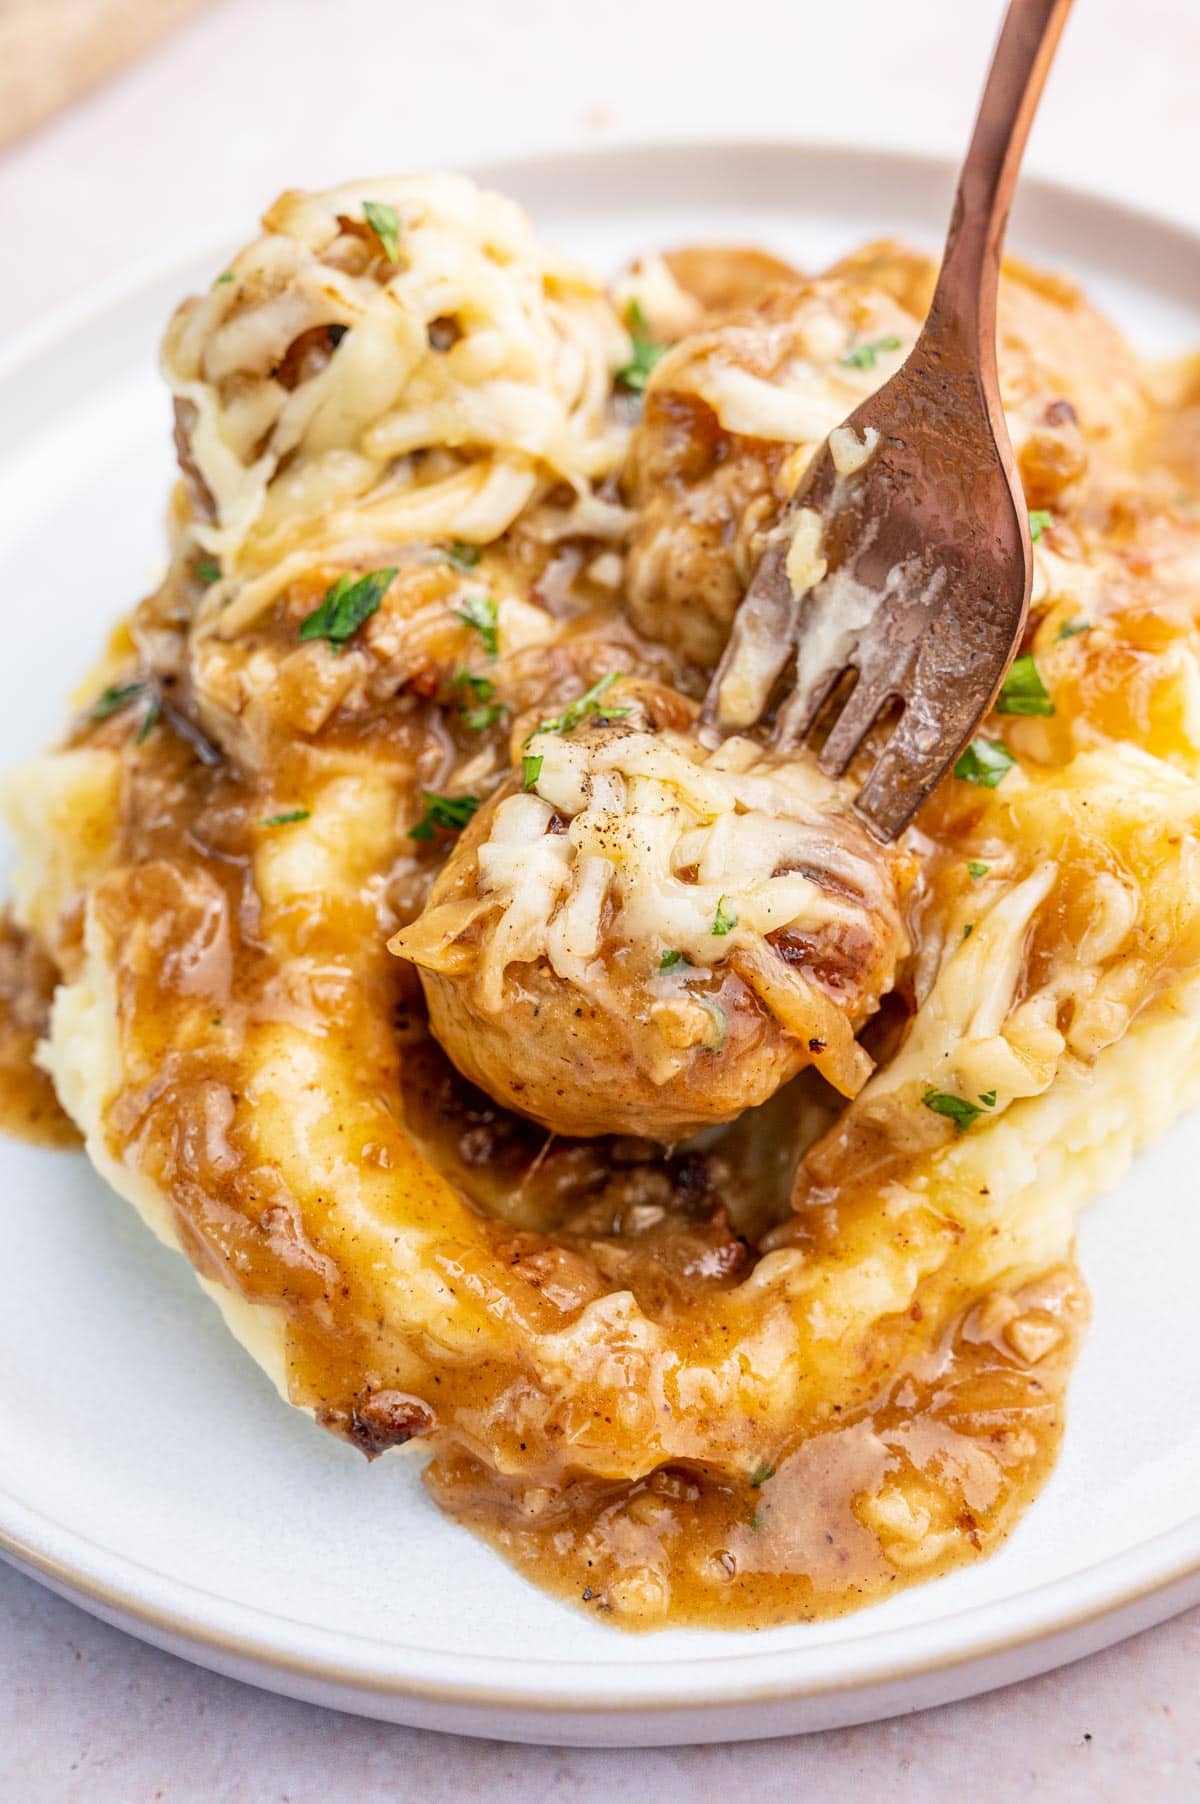 French onion meatballs with gravy and mashed potatoes on a white plate.